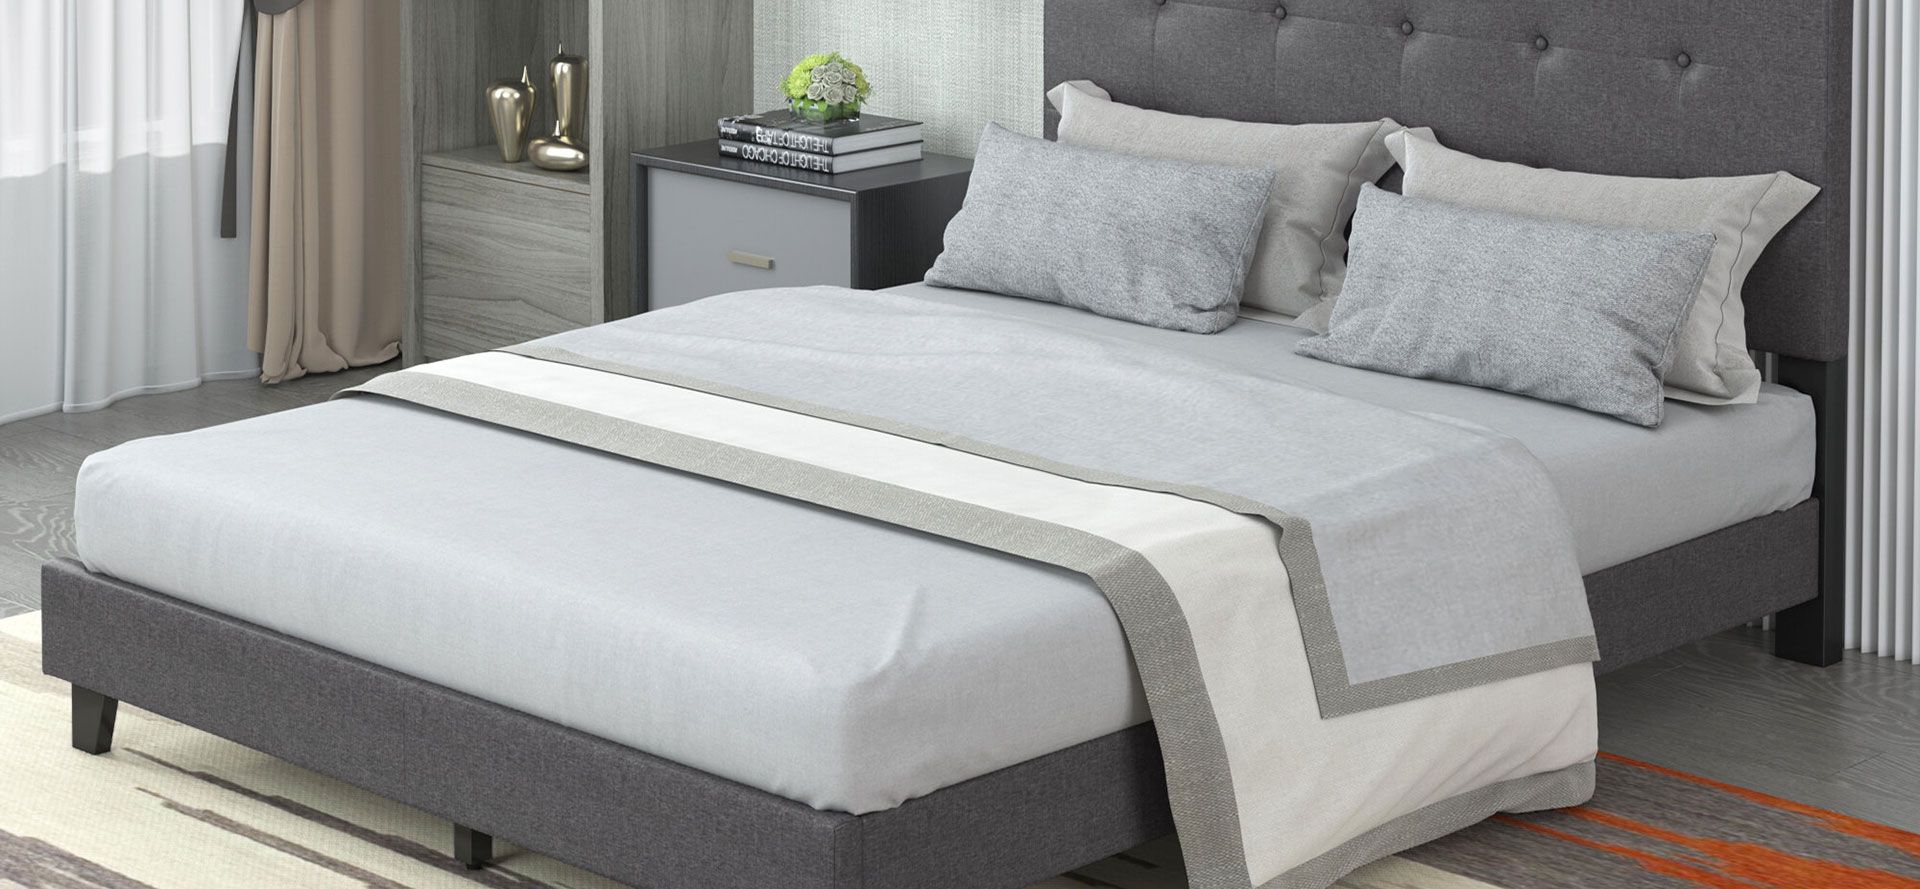 Waterbed Mattress Provides Great Support For The Entire Body.